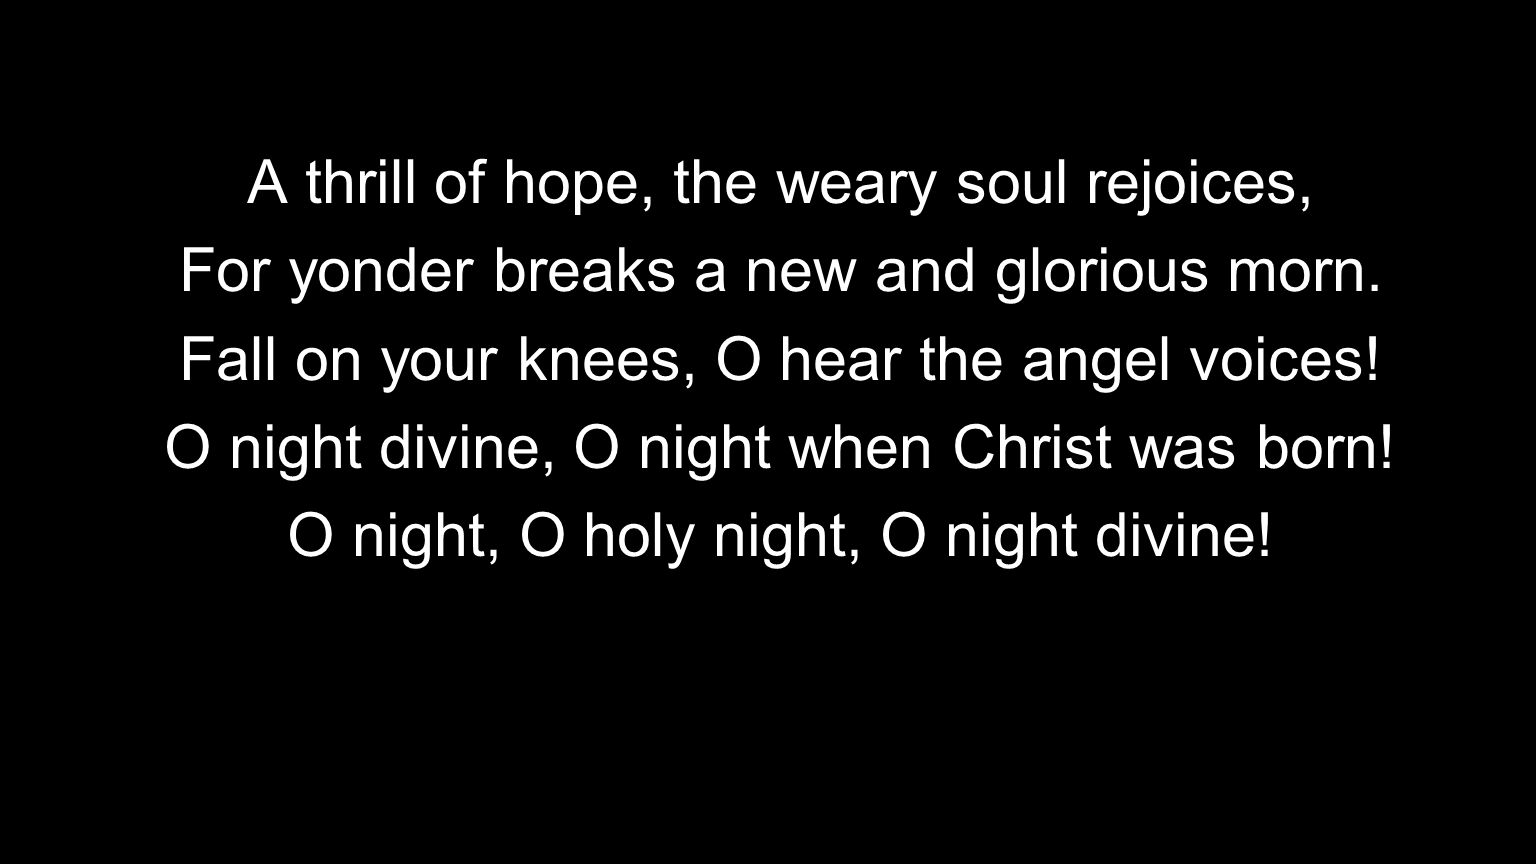 A thrill of hope, the weary soul rejoices, For yonder breaks a new and glorious morn.